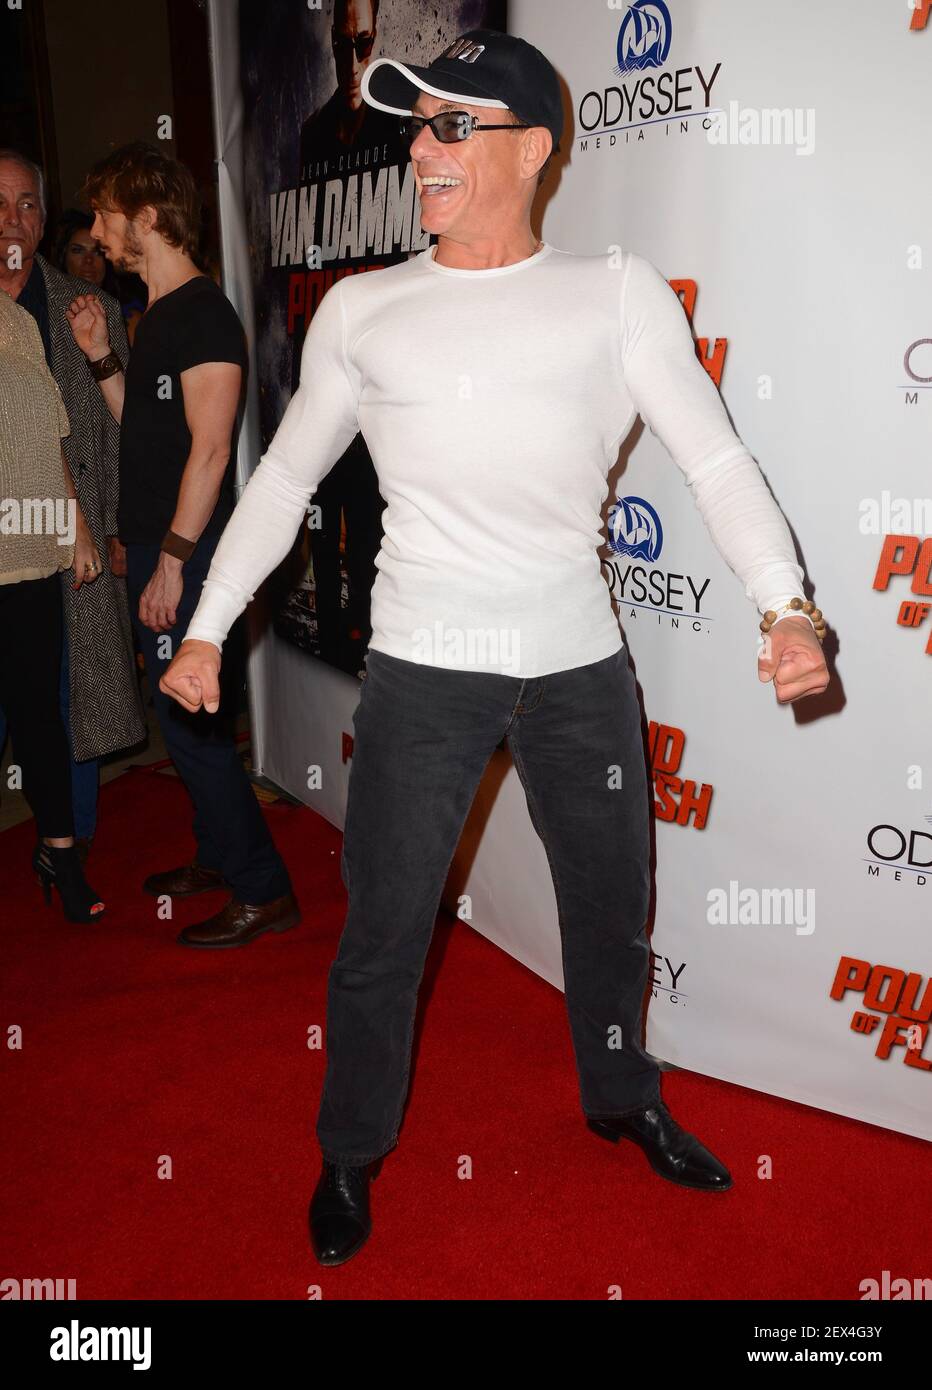 07 May 2015 - Los Angeles, California - Jean-Claude Van Damme. Odyssey  Media Inc. presents the Los Angeles premiere of "Pound of Flesh" held at  Pacific Theaters at The Grove. Photo Credit: